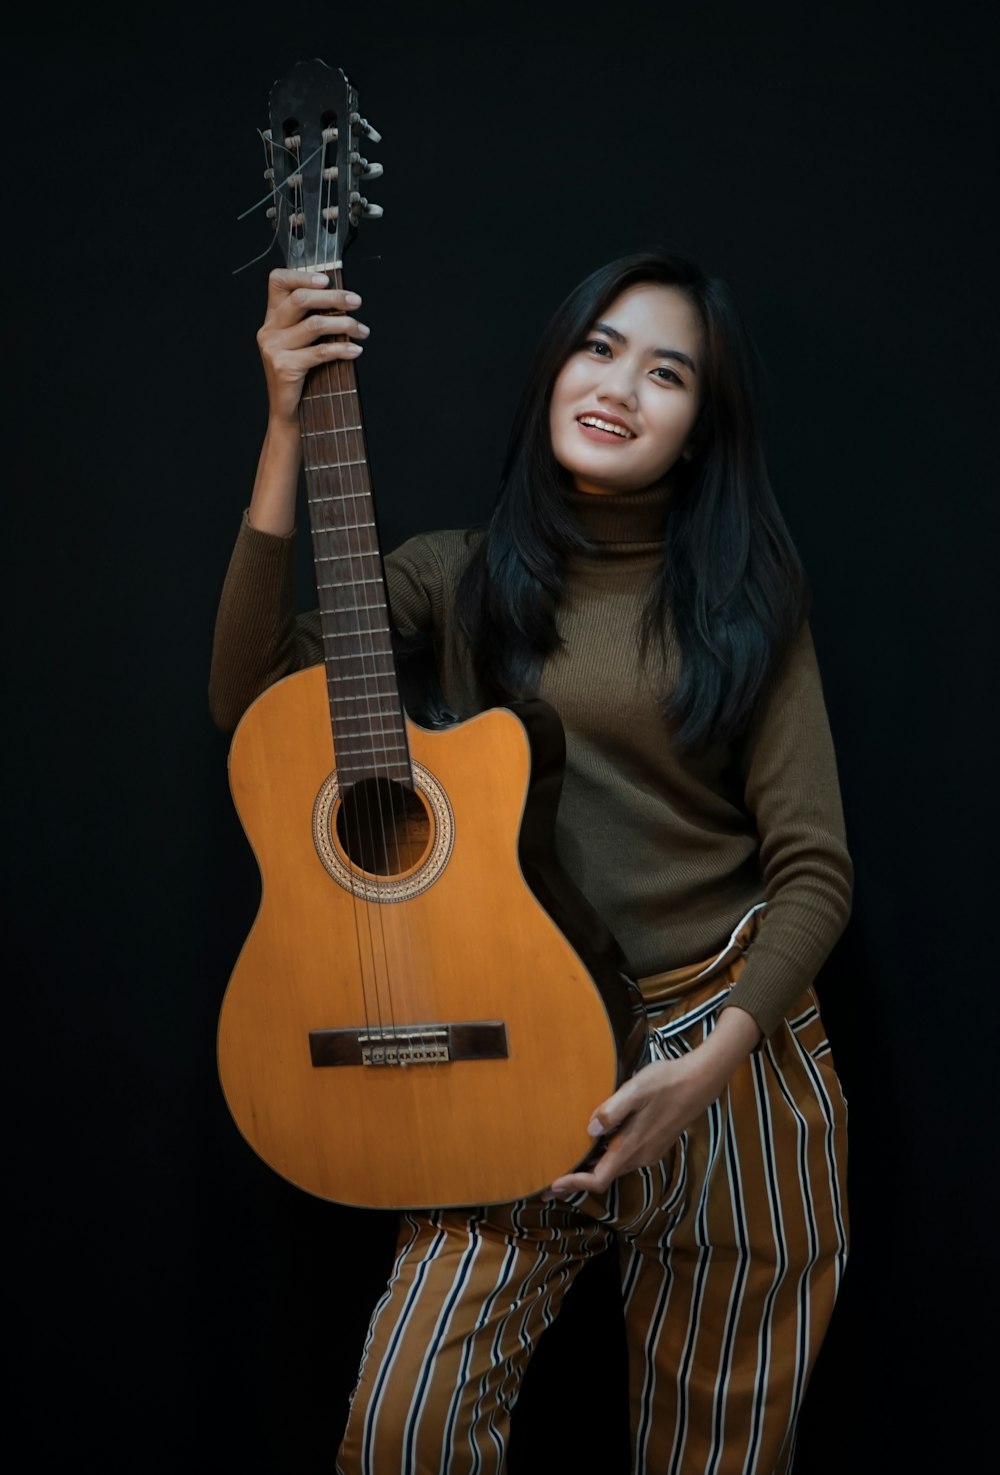 smiling woman while holding cut-away acoustic guitar